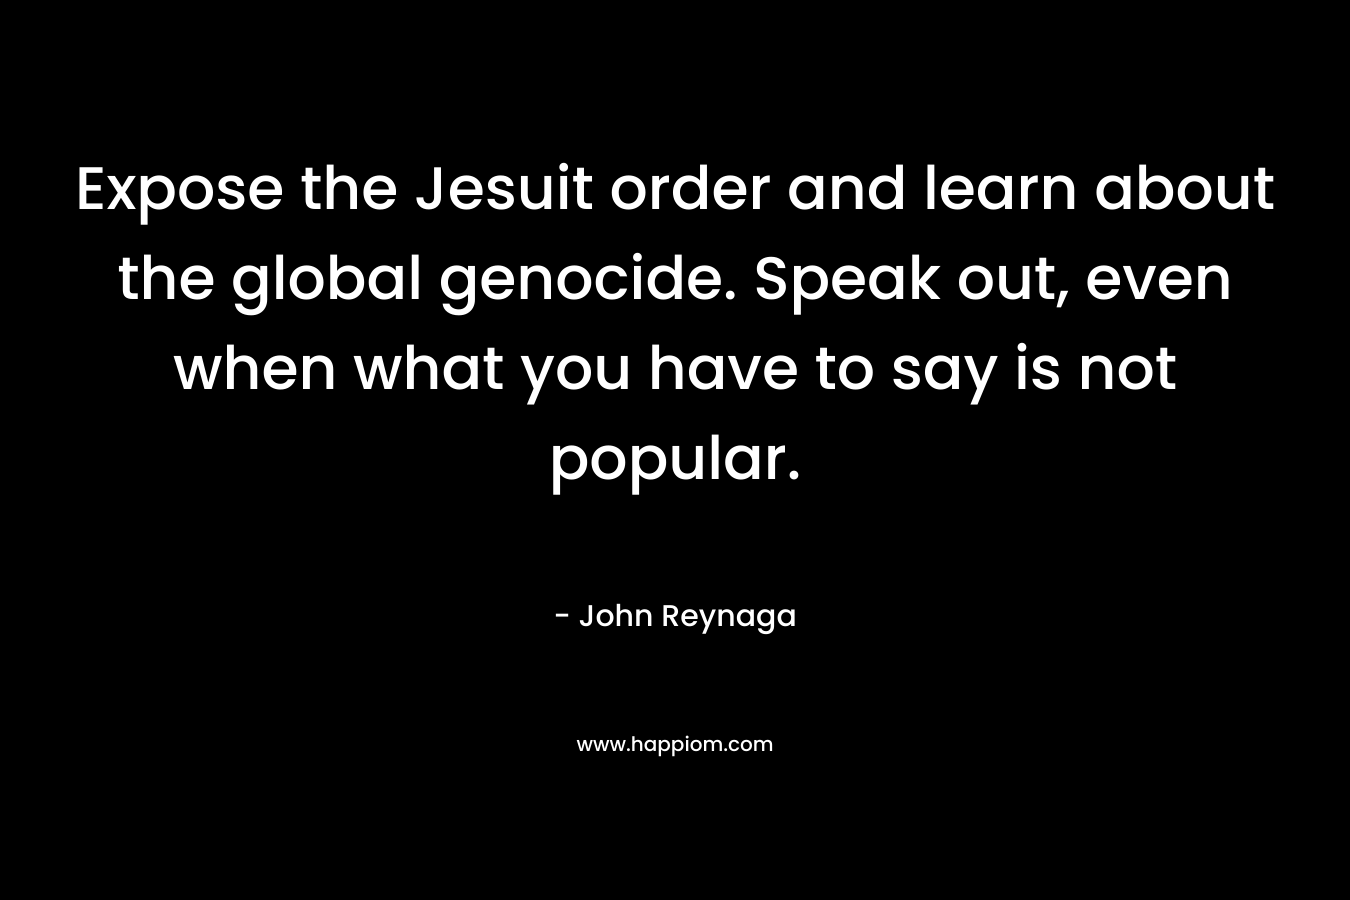 Expose the Jesuit order and learn about the global genocide. Speak out, even when what you have to say is not popular.